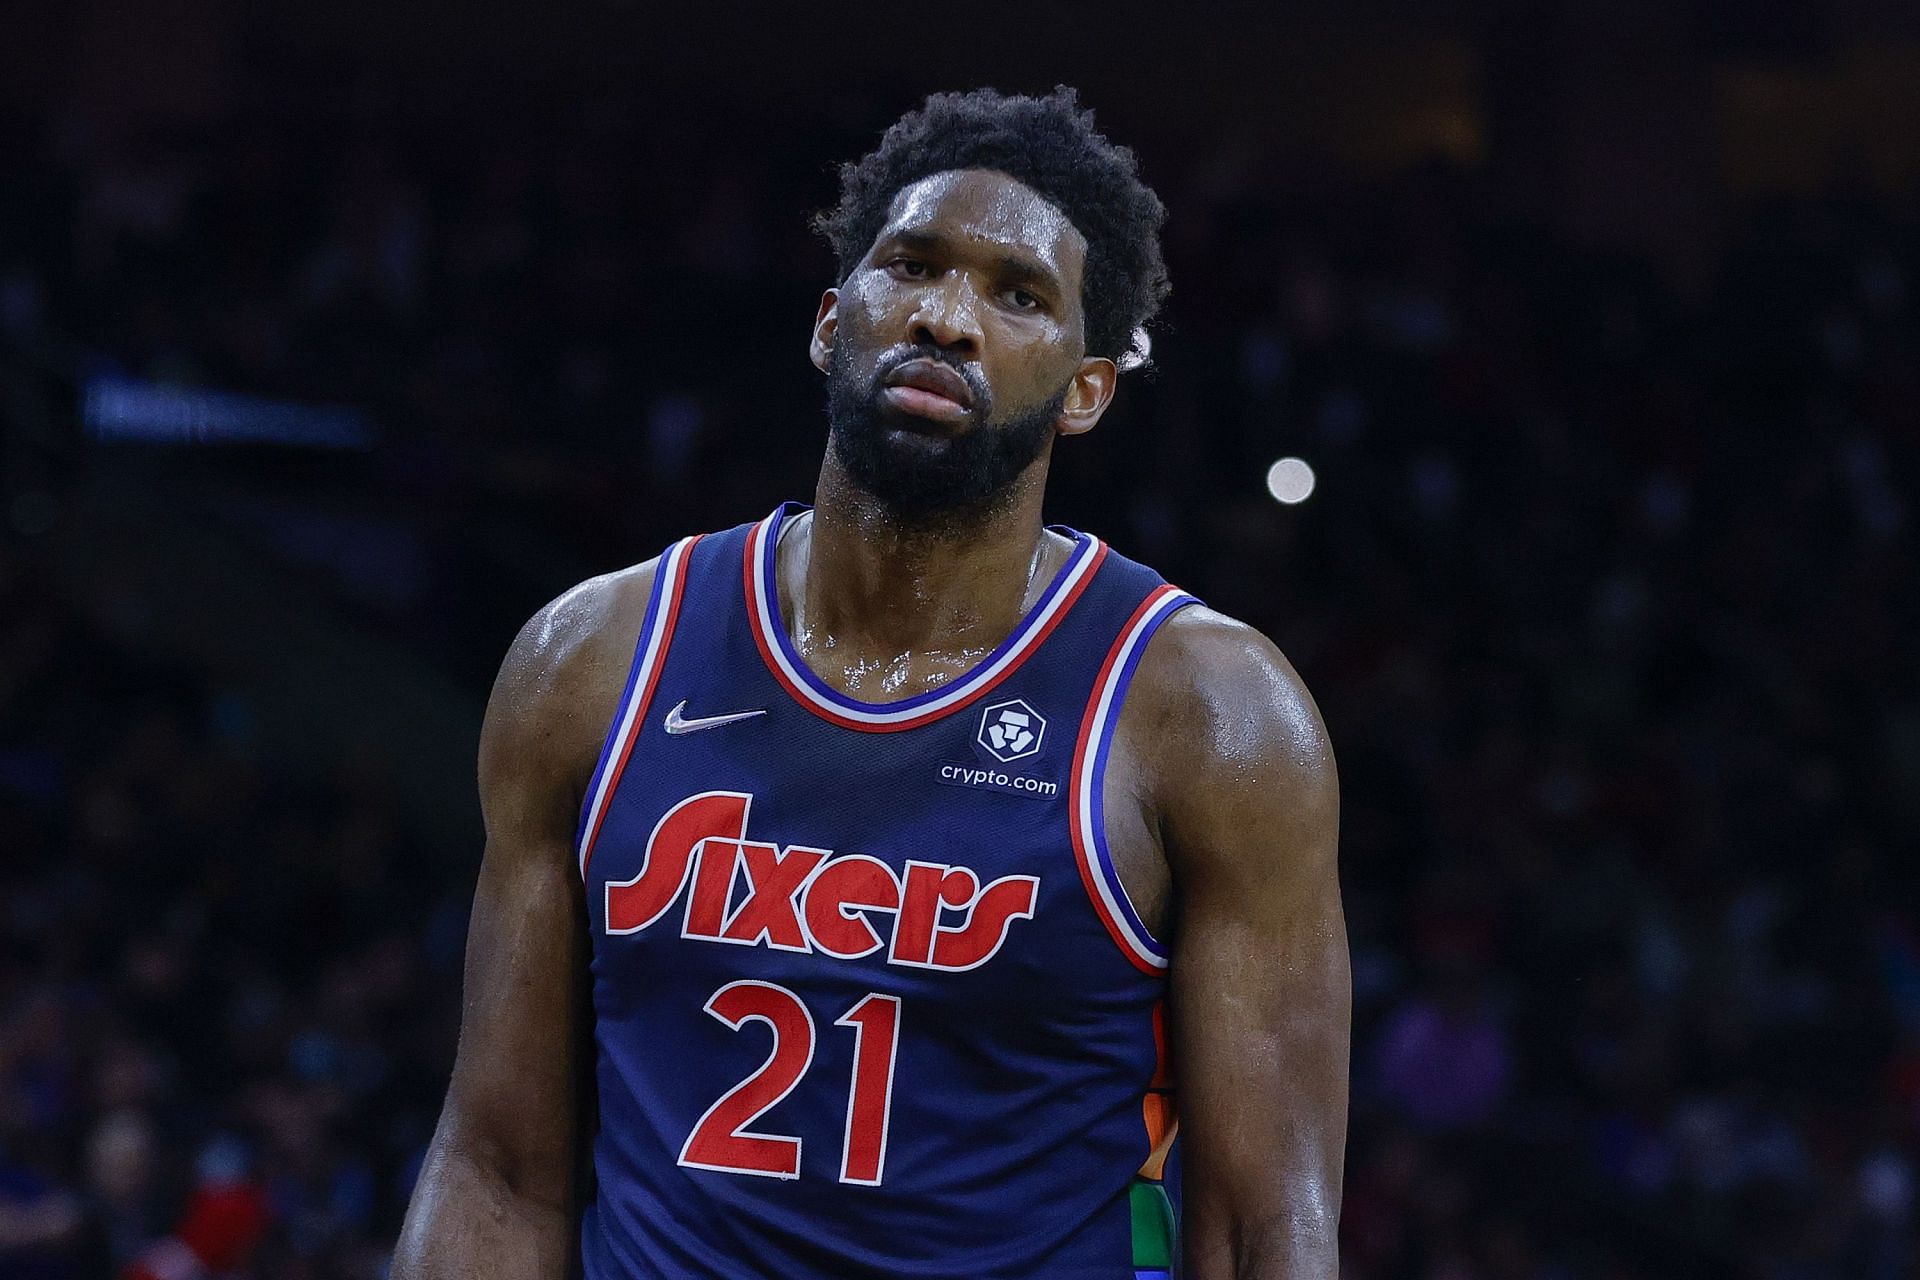 Joel Embiid came up with a dominant 41-point game for the Philadelphia 76ers vs Enes Freedom and the Boston Celtics on Tuesday.